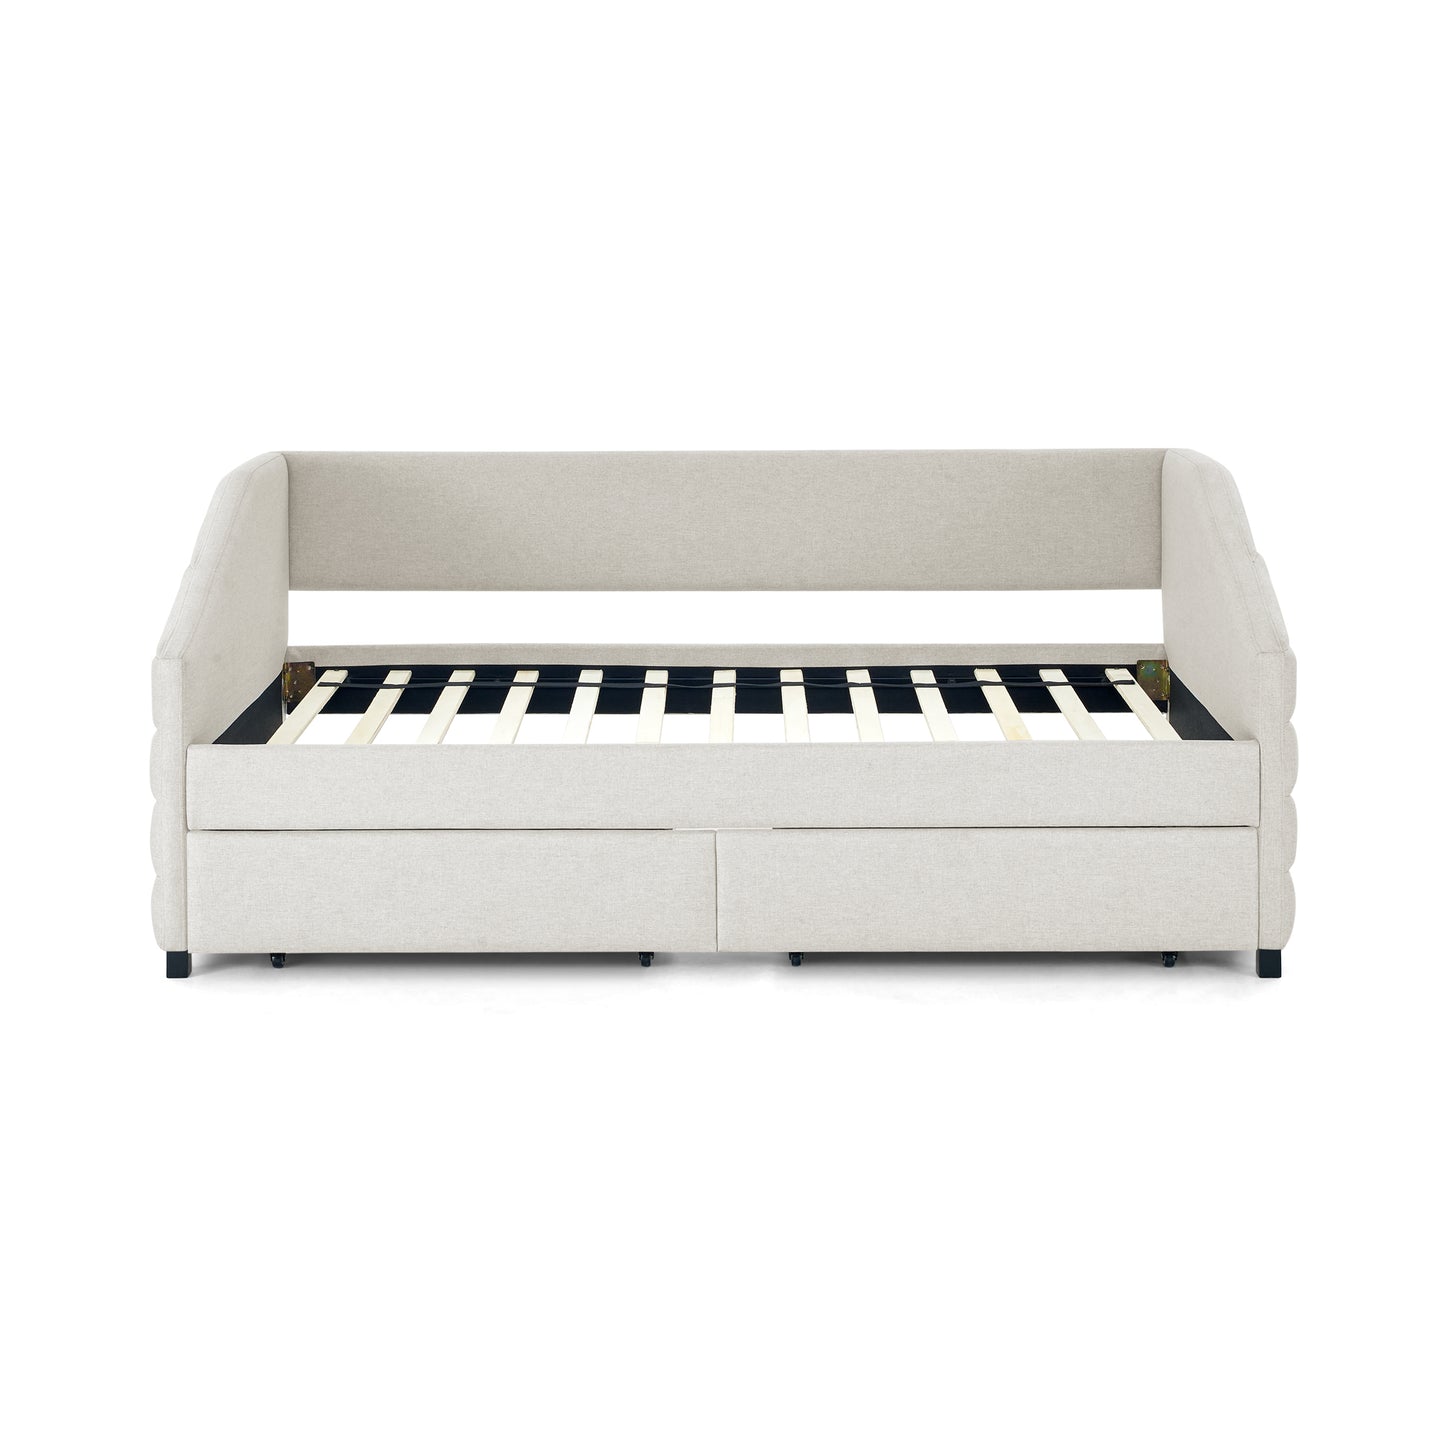 Twin Size Upholstered Tufted Daybed with Two Drawers, Linen Fabric, Beige (82.5"x42.5"x34")